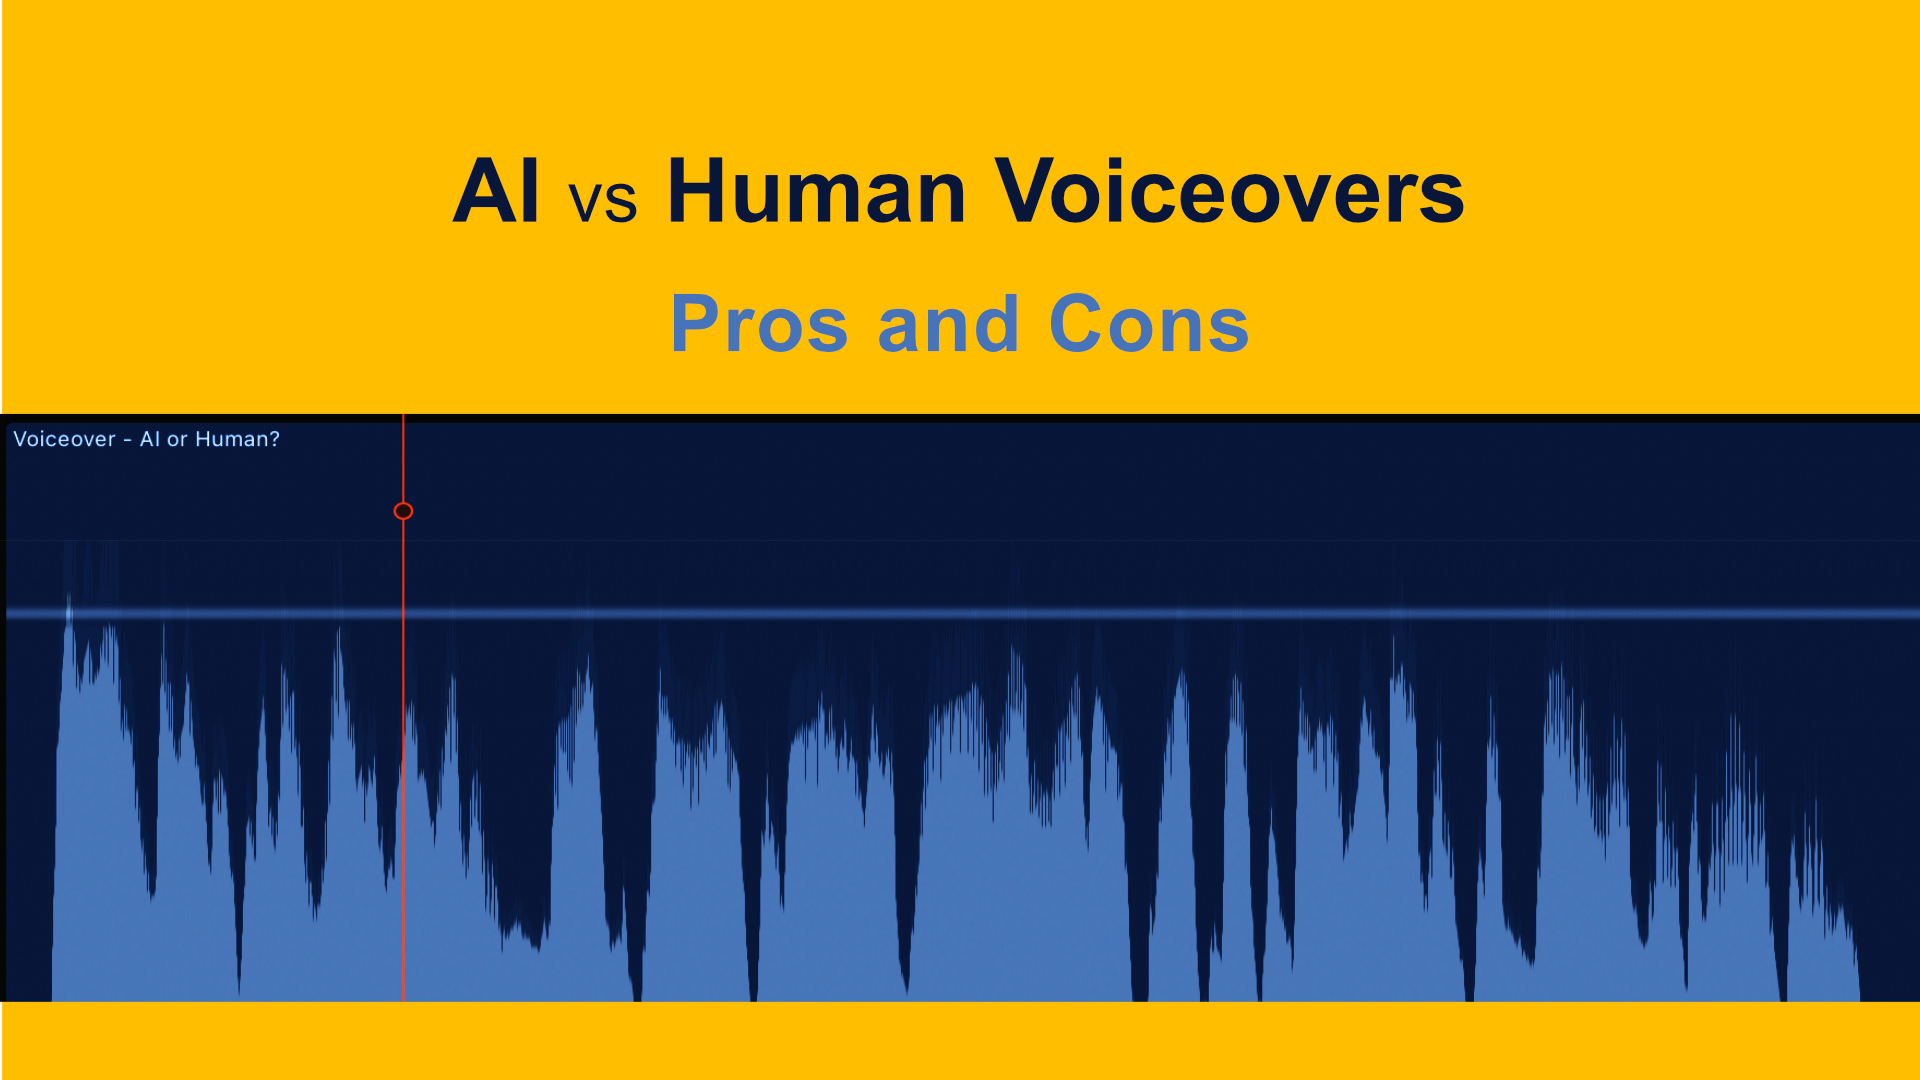 AI versus Human Voiceovers - Pros and Cons with blue waveform image